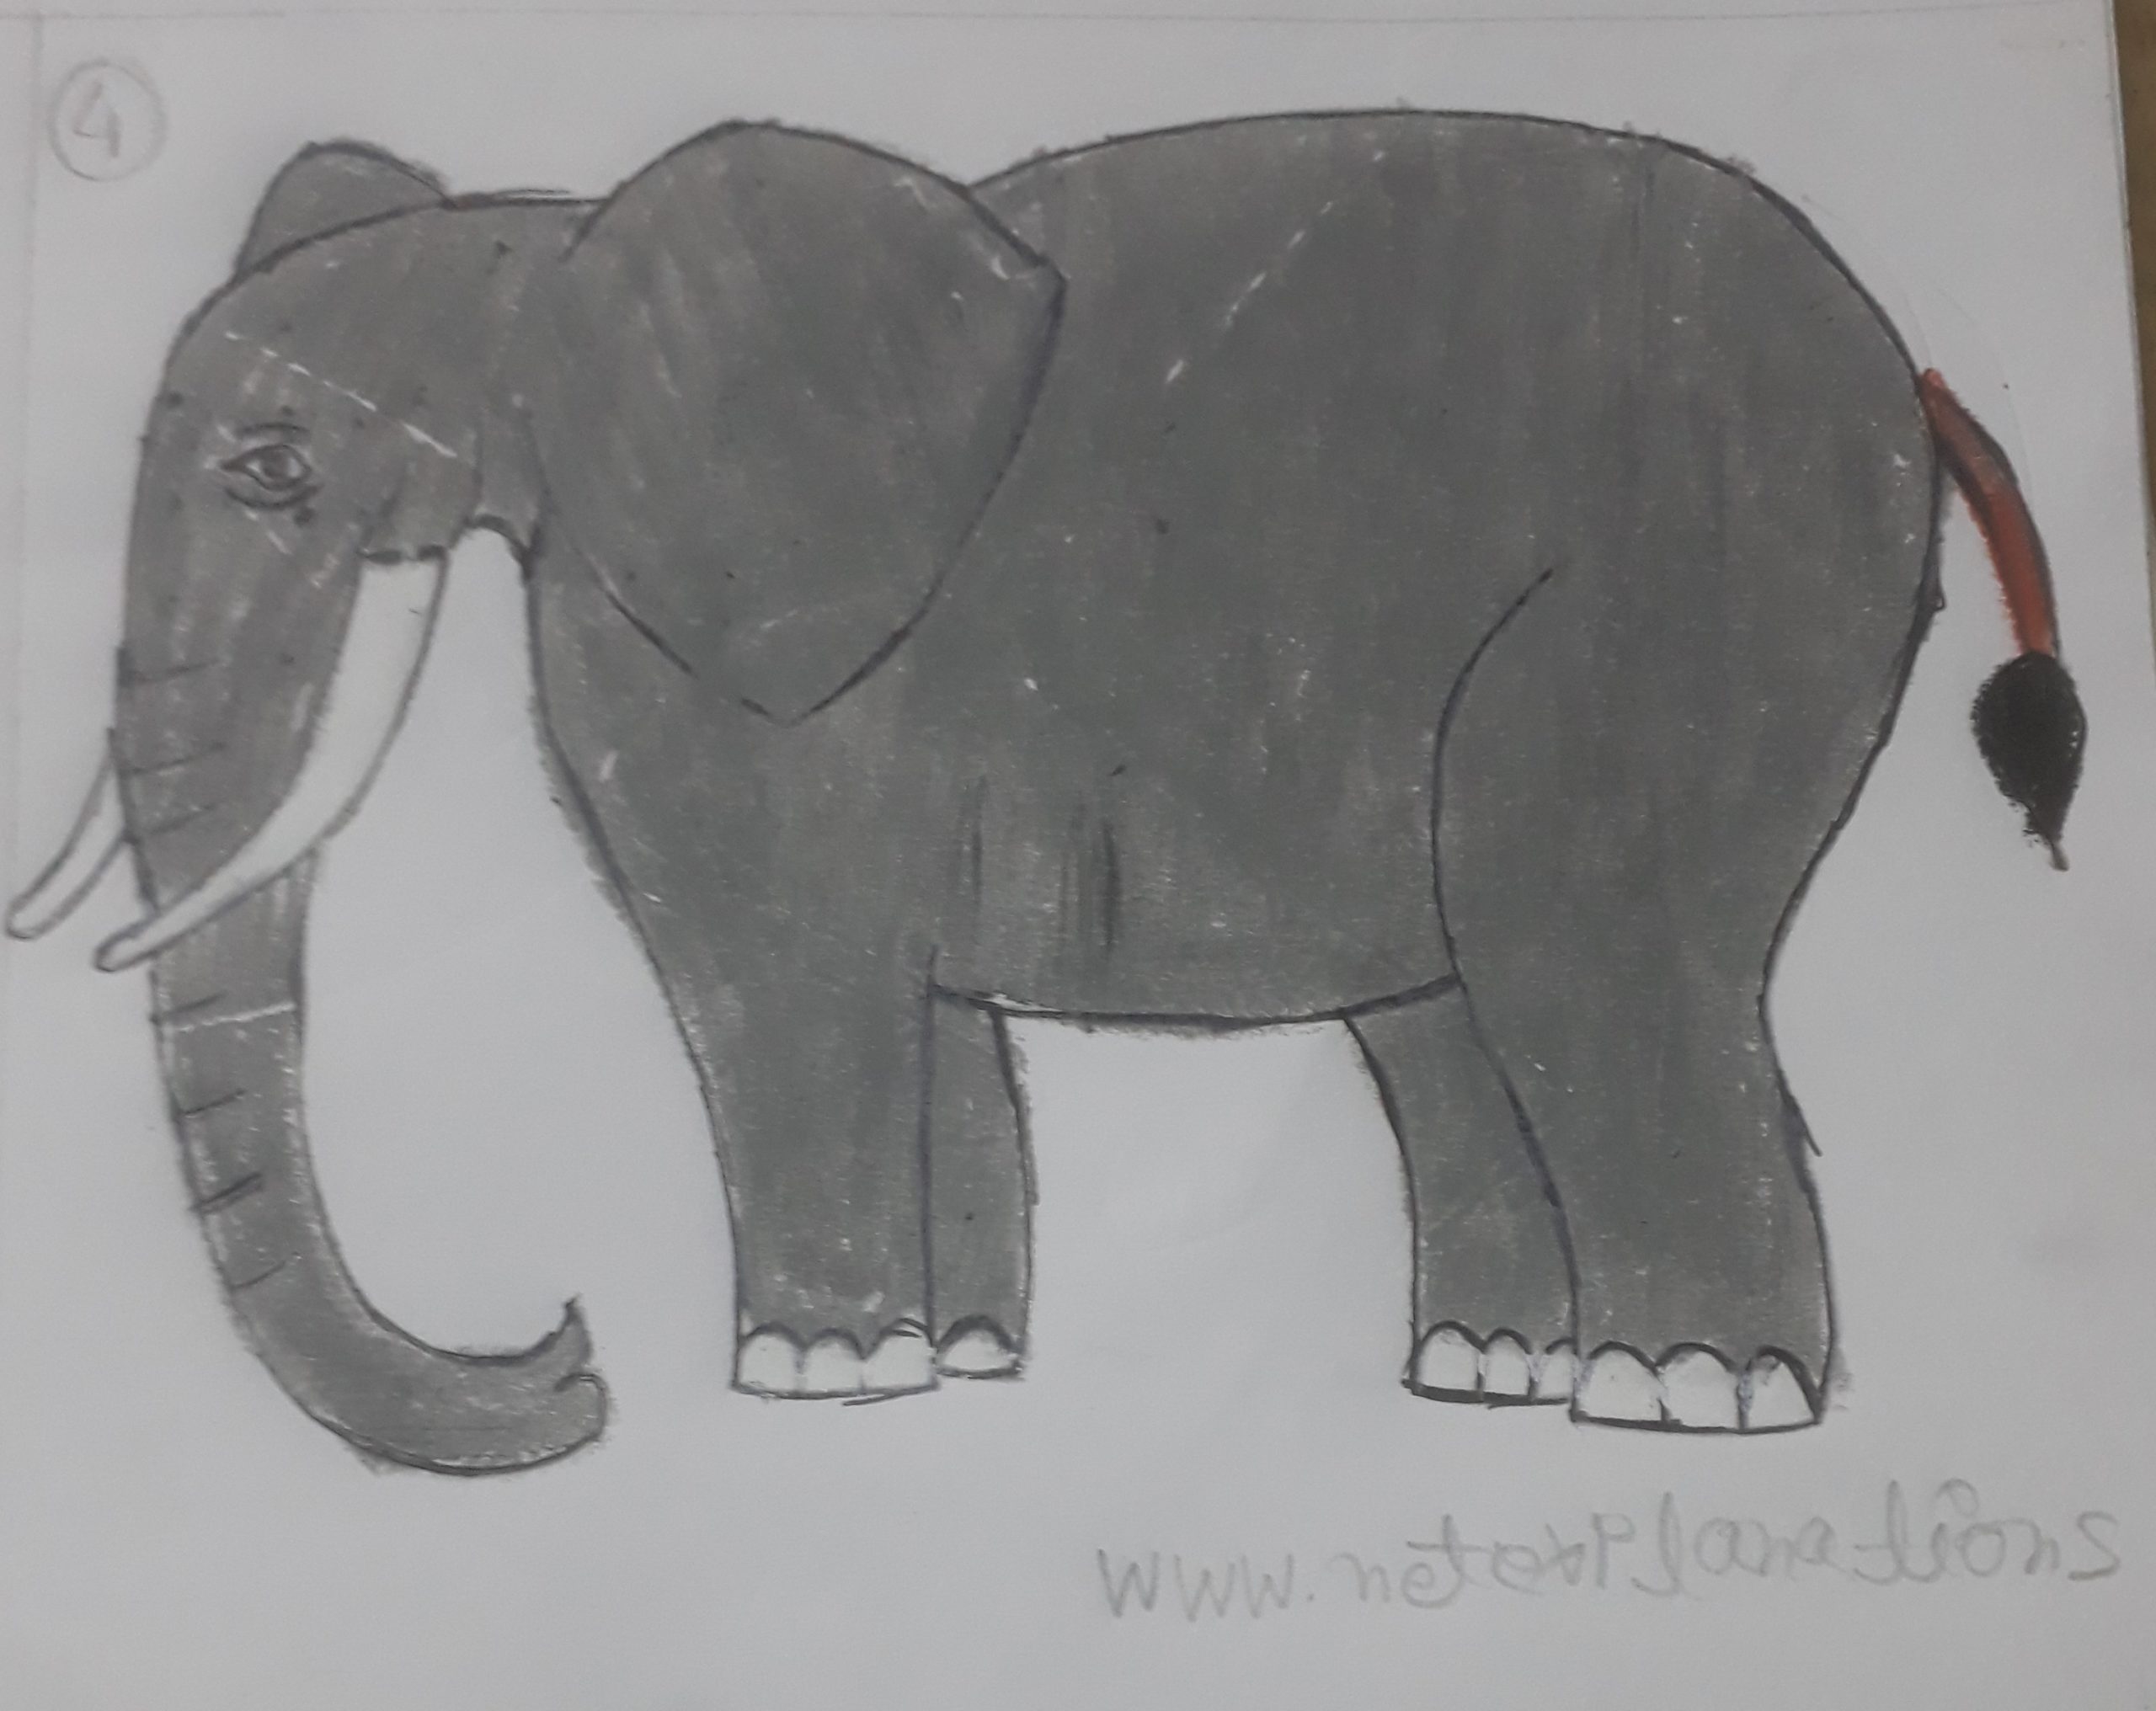 Elephant with its Trunk Up Pencil Drawing  How to Sketch Elephant with its  Trunk Up using Pencils  DrawingTutorials101com